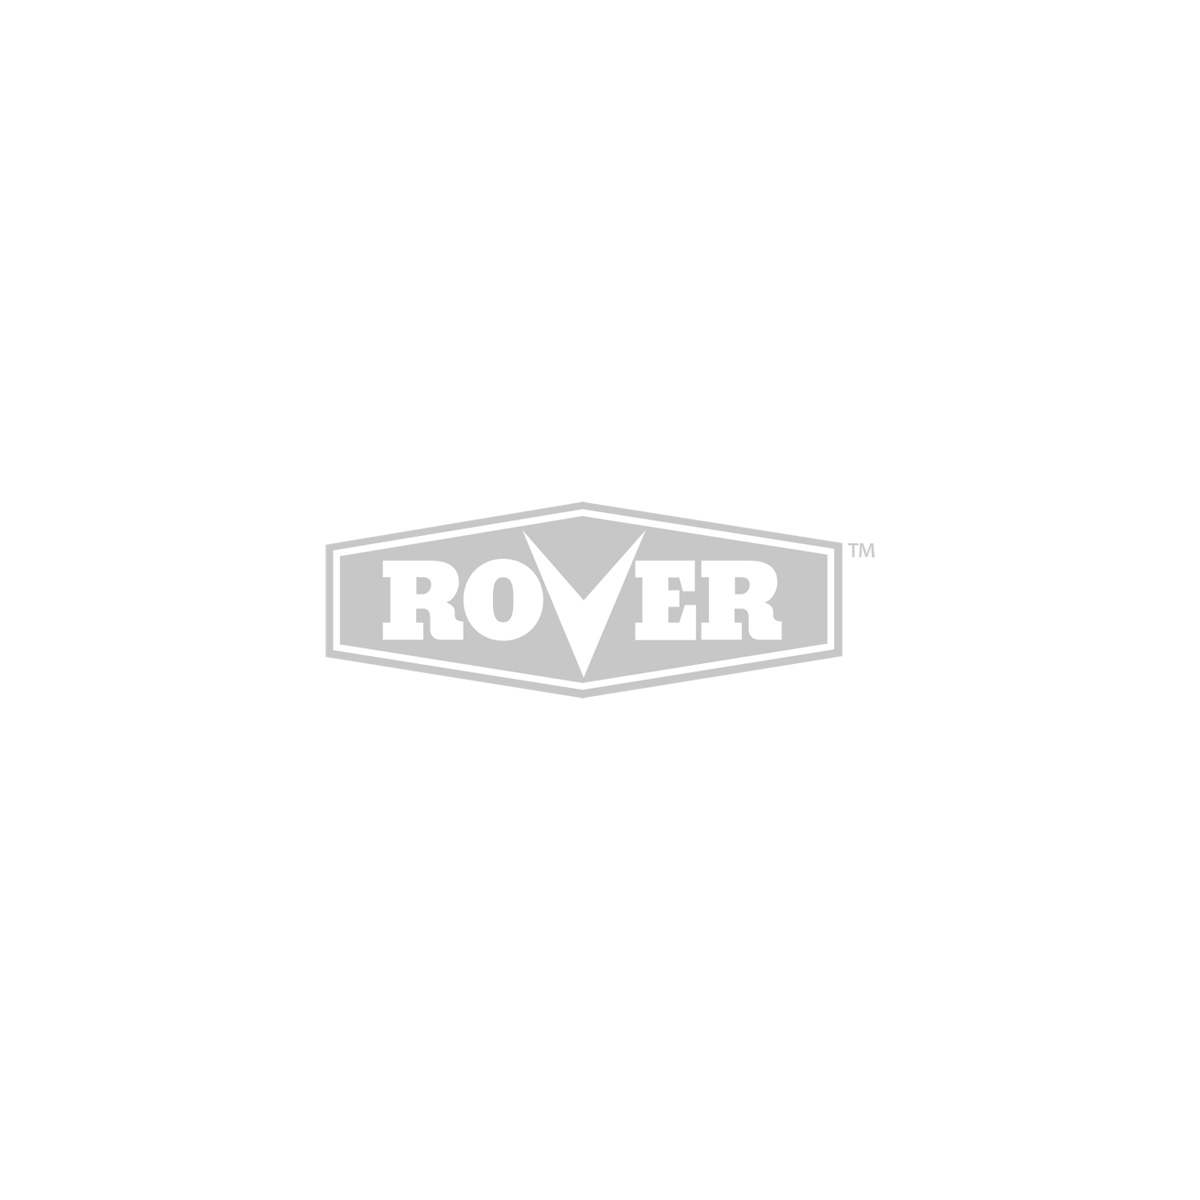 Rover Blade Kit suitable for 18